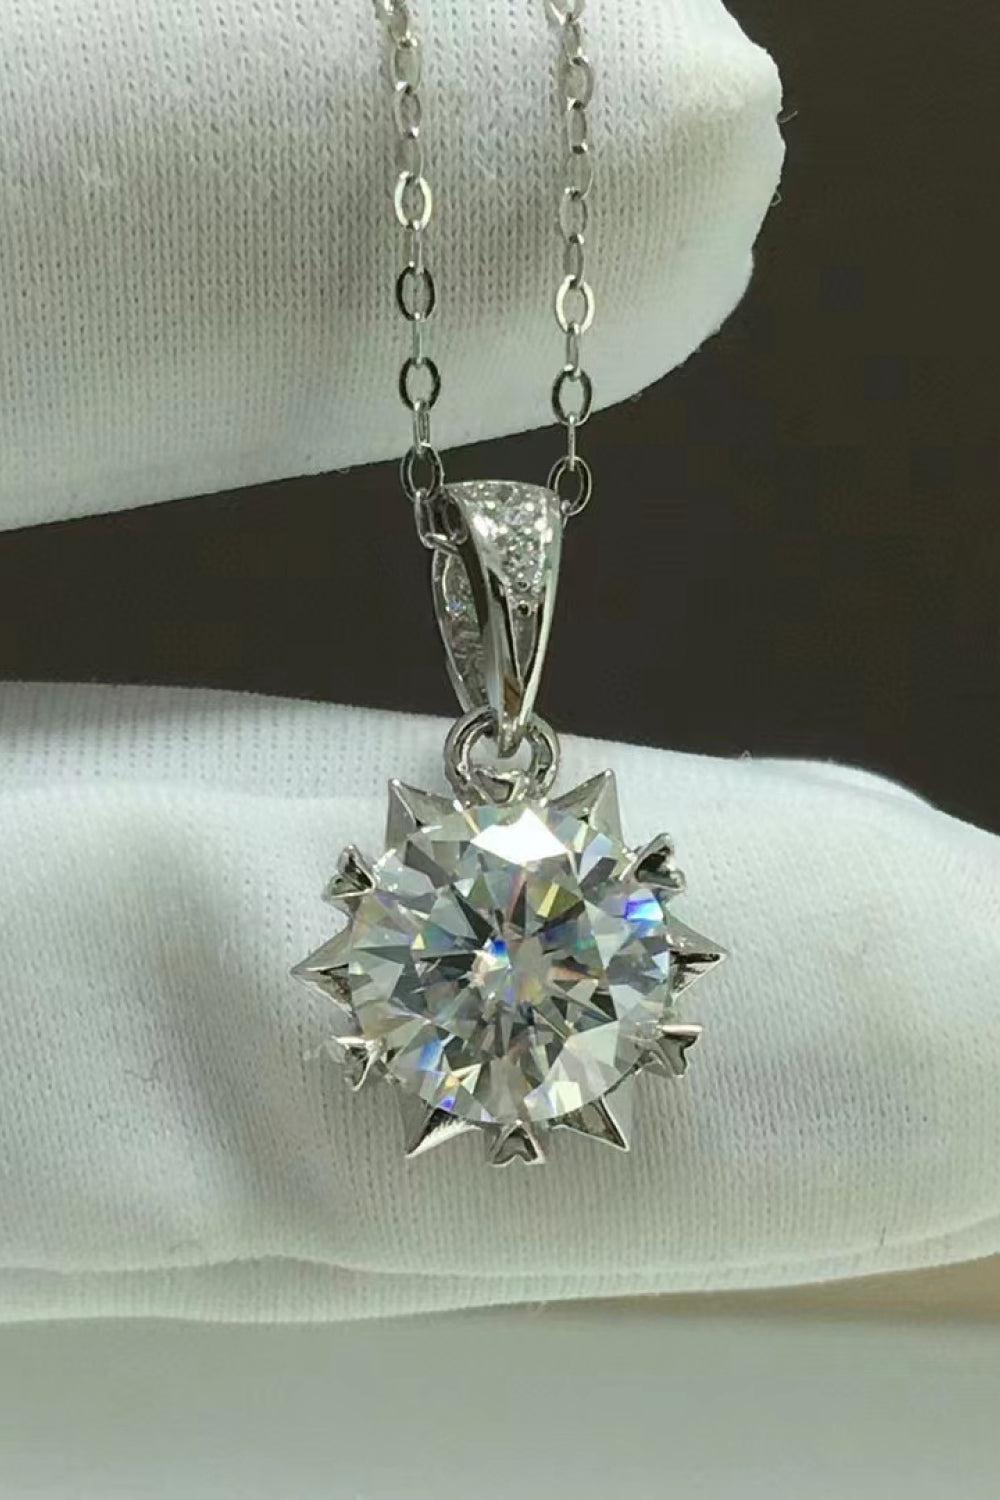 Looking At You 2 Carat Moissanite Pendant Necklace BLUE ZONE PLANET